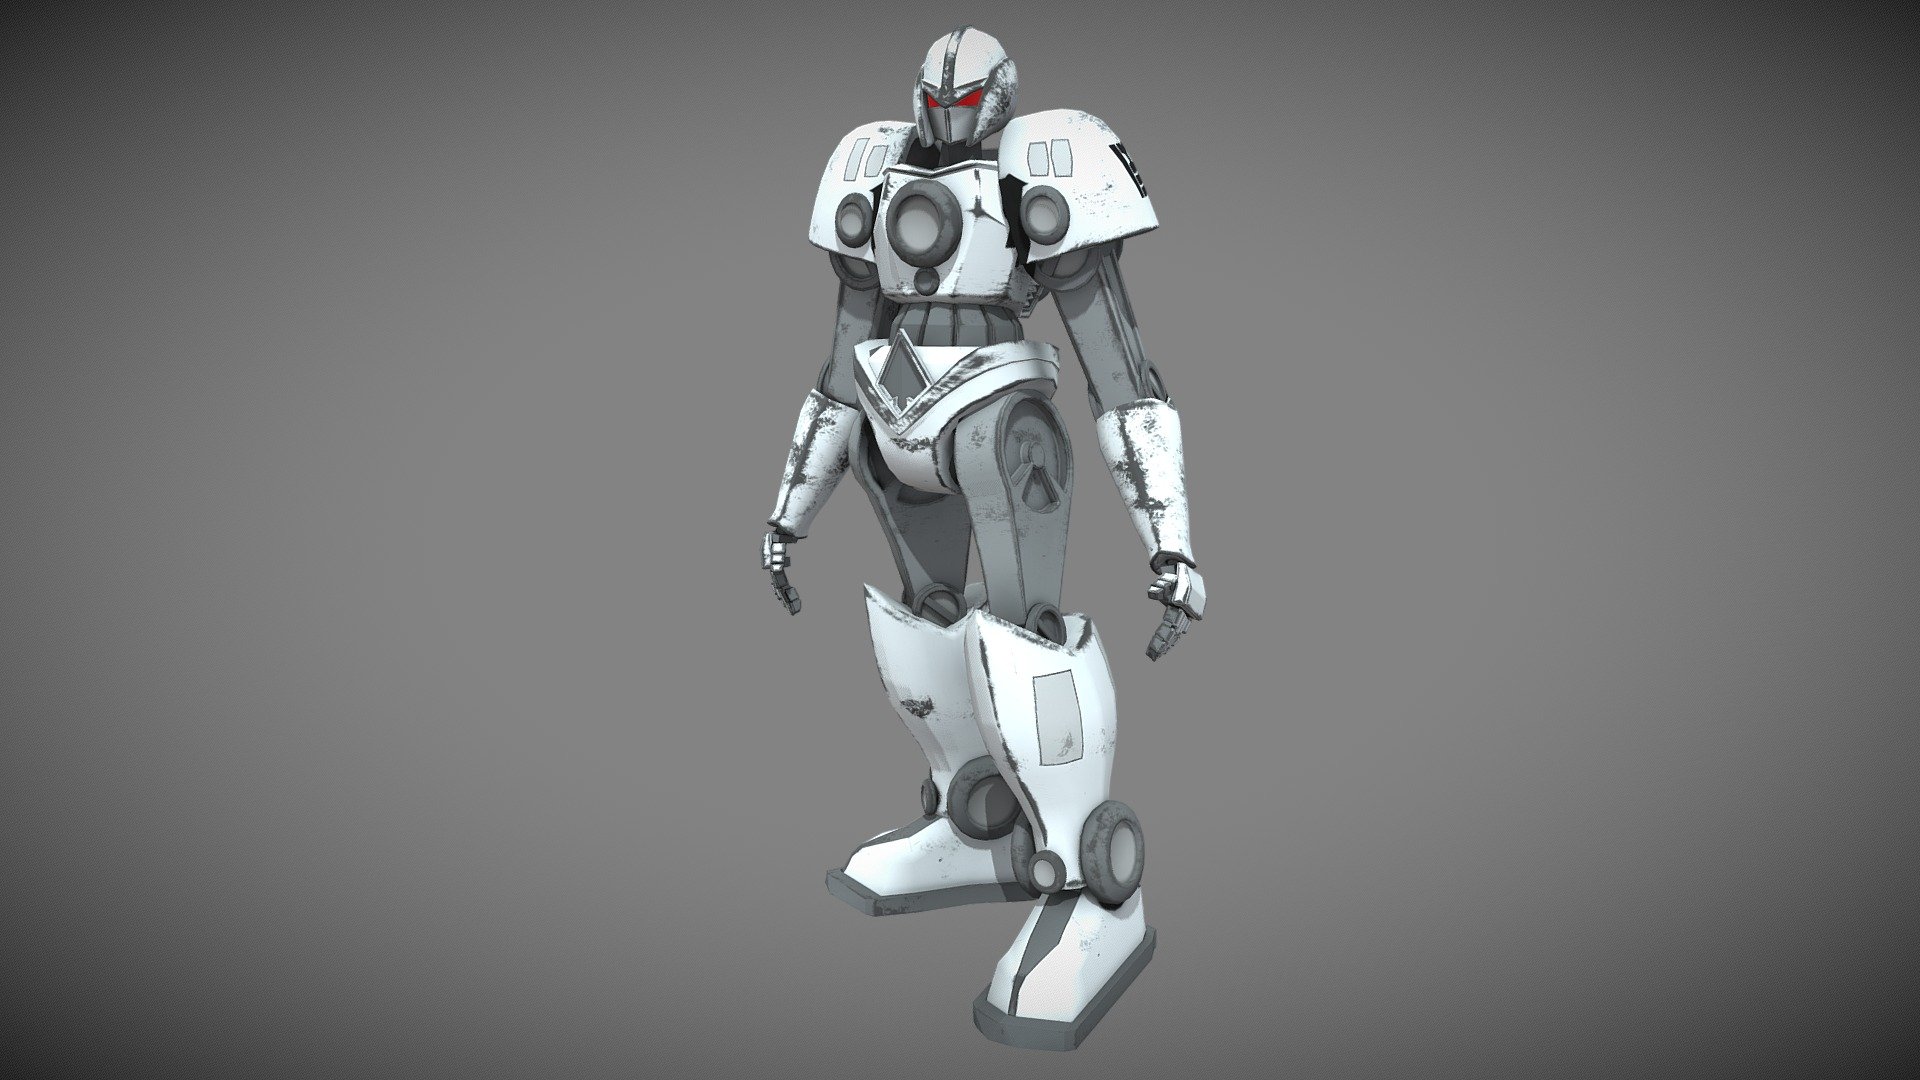 Mech Design for 歩く戦車戦士 Walking Tank Warrior which can be played at https://was-a-horse.itch.io/walking-tank-warrior - 歩く戦車戦士 Walking Tank Warrior - Player Mech - 3D model by Stuart.Wright 3d model